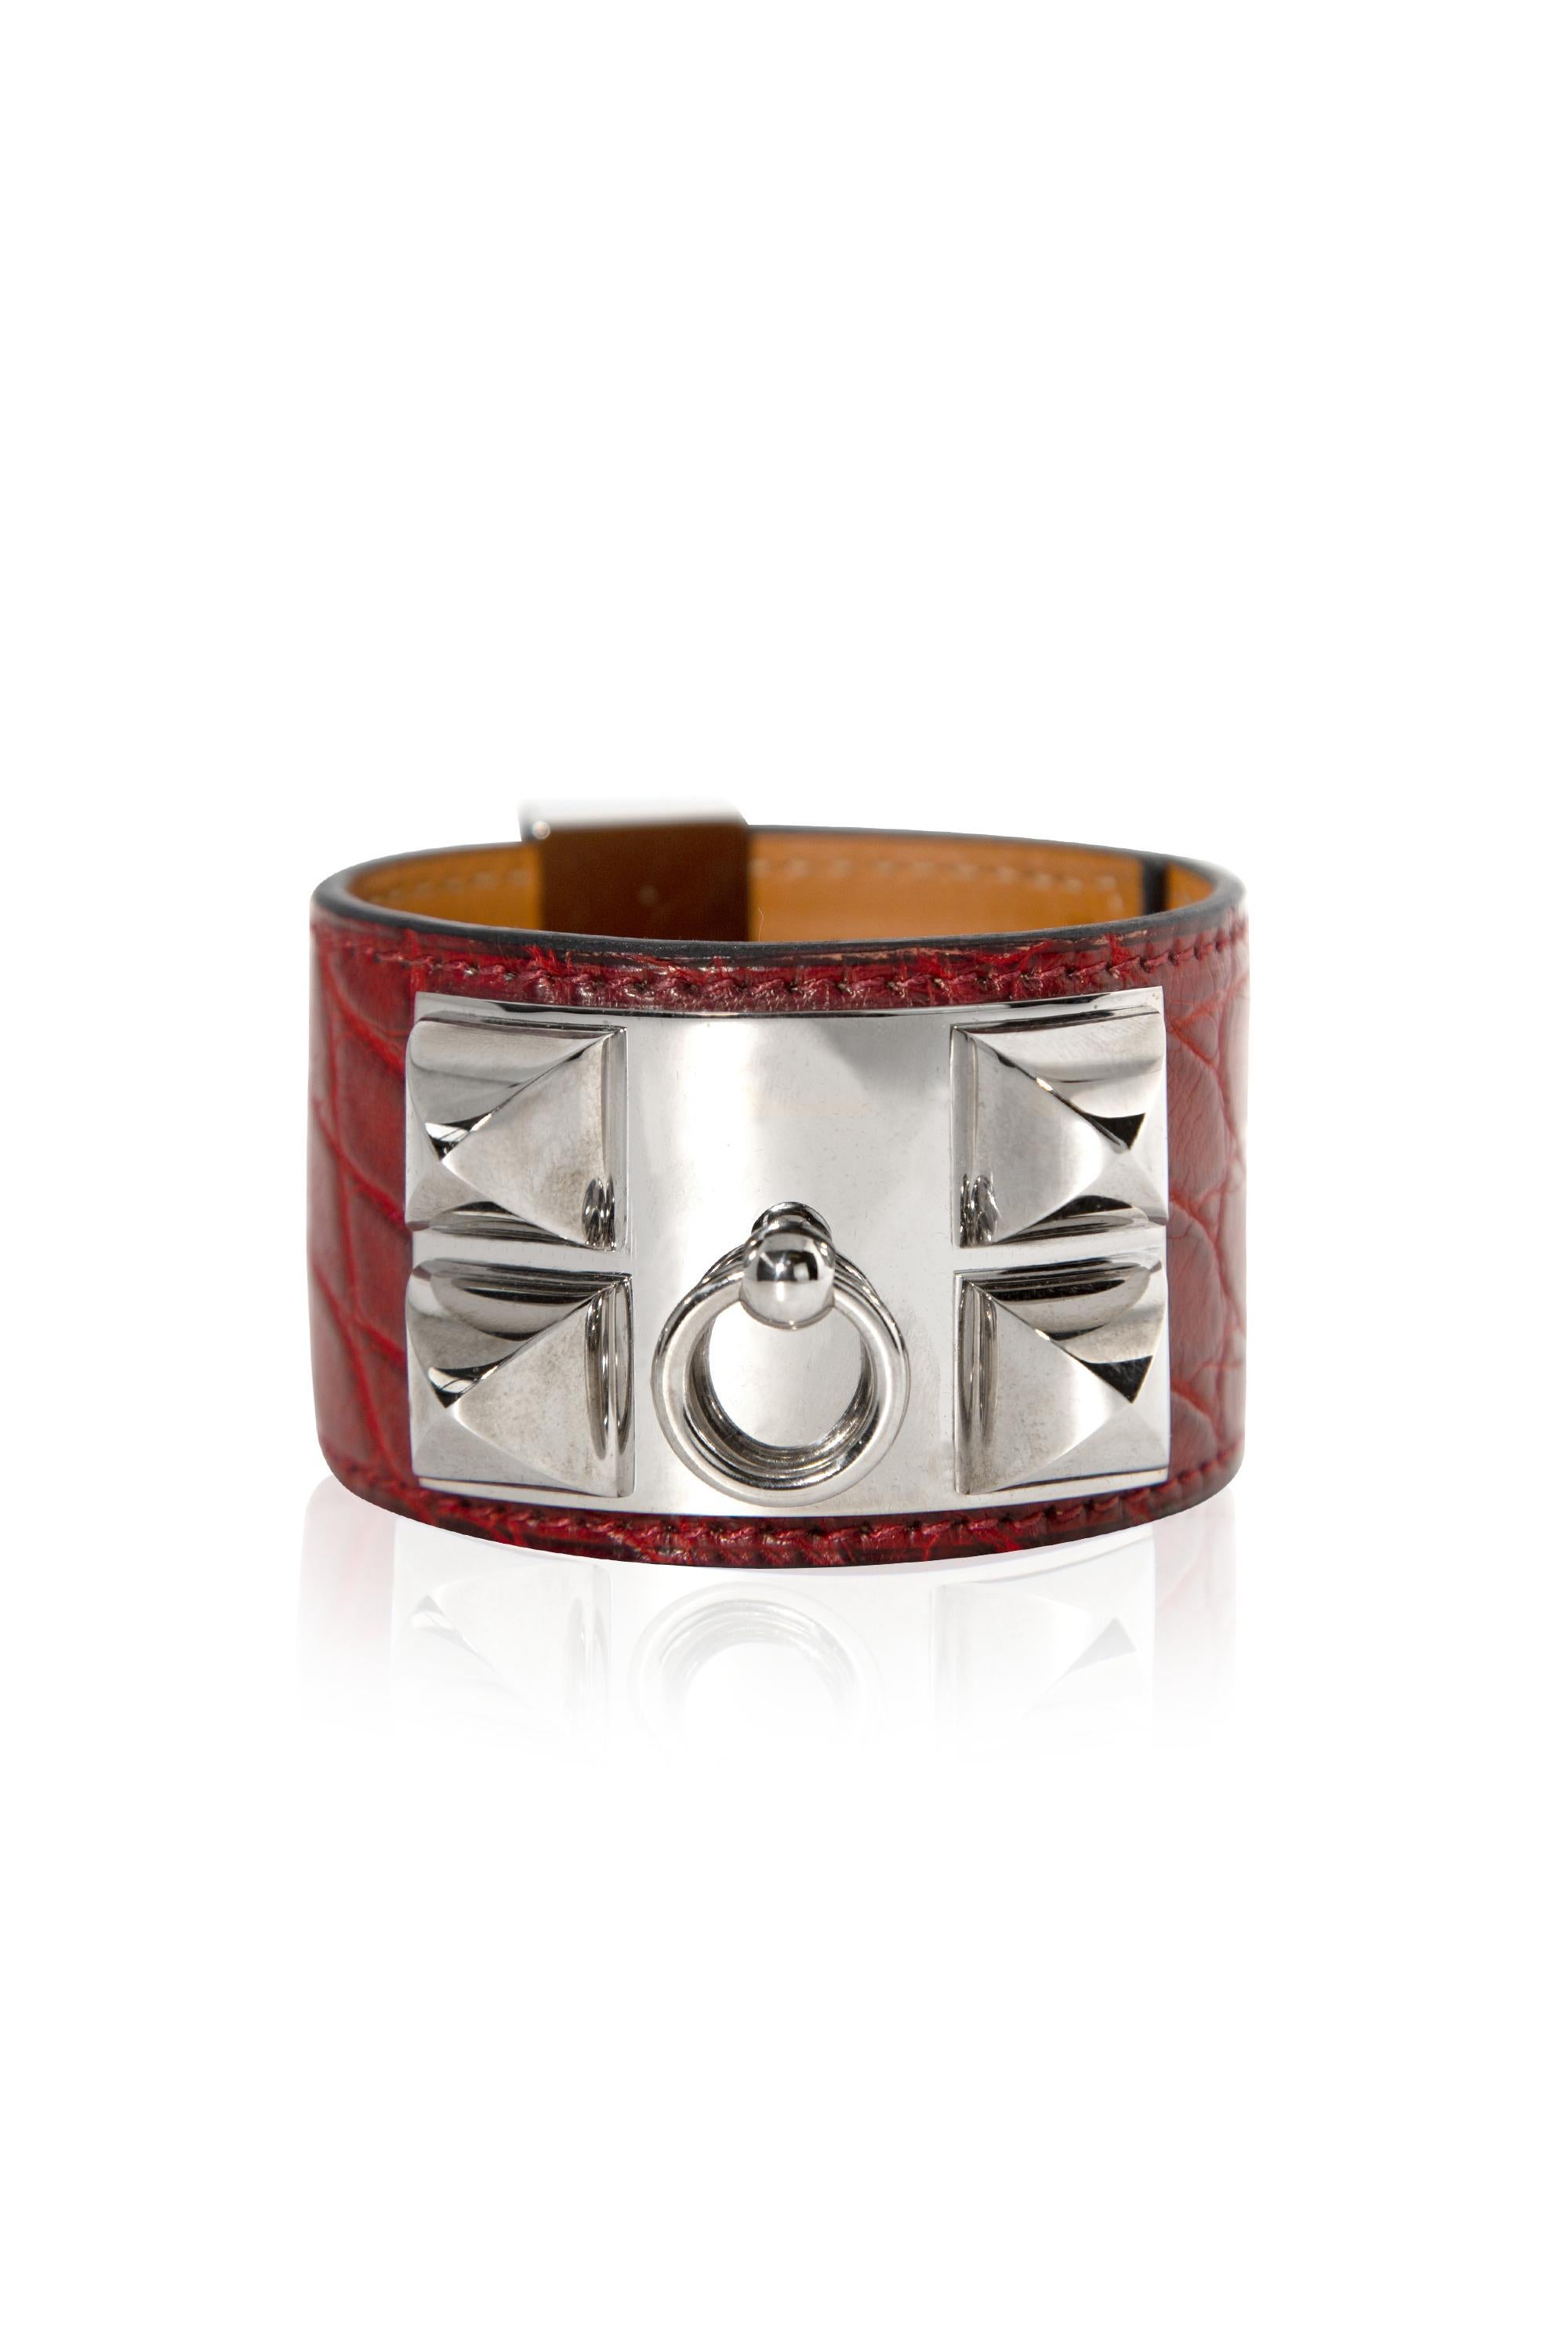 Hermès Collier de Chien Bracelet Burgundy Exotic Leather PHW In Excellent Condition For Sale In London, GB